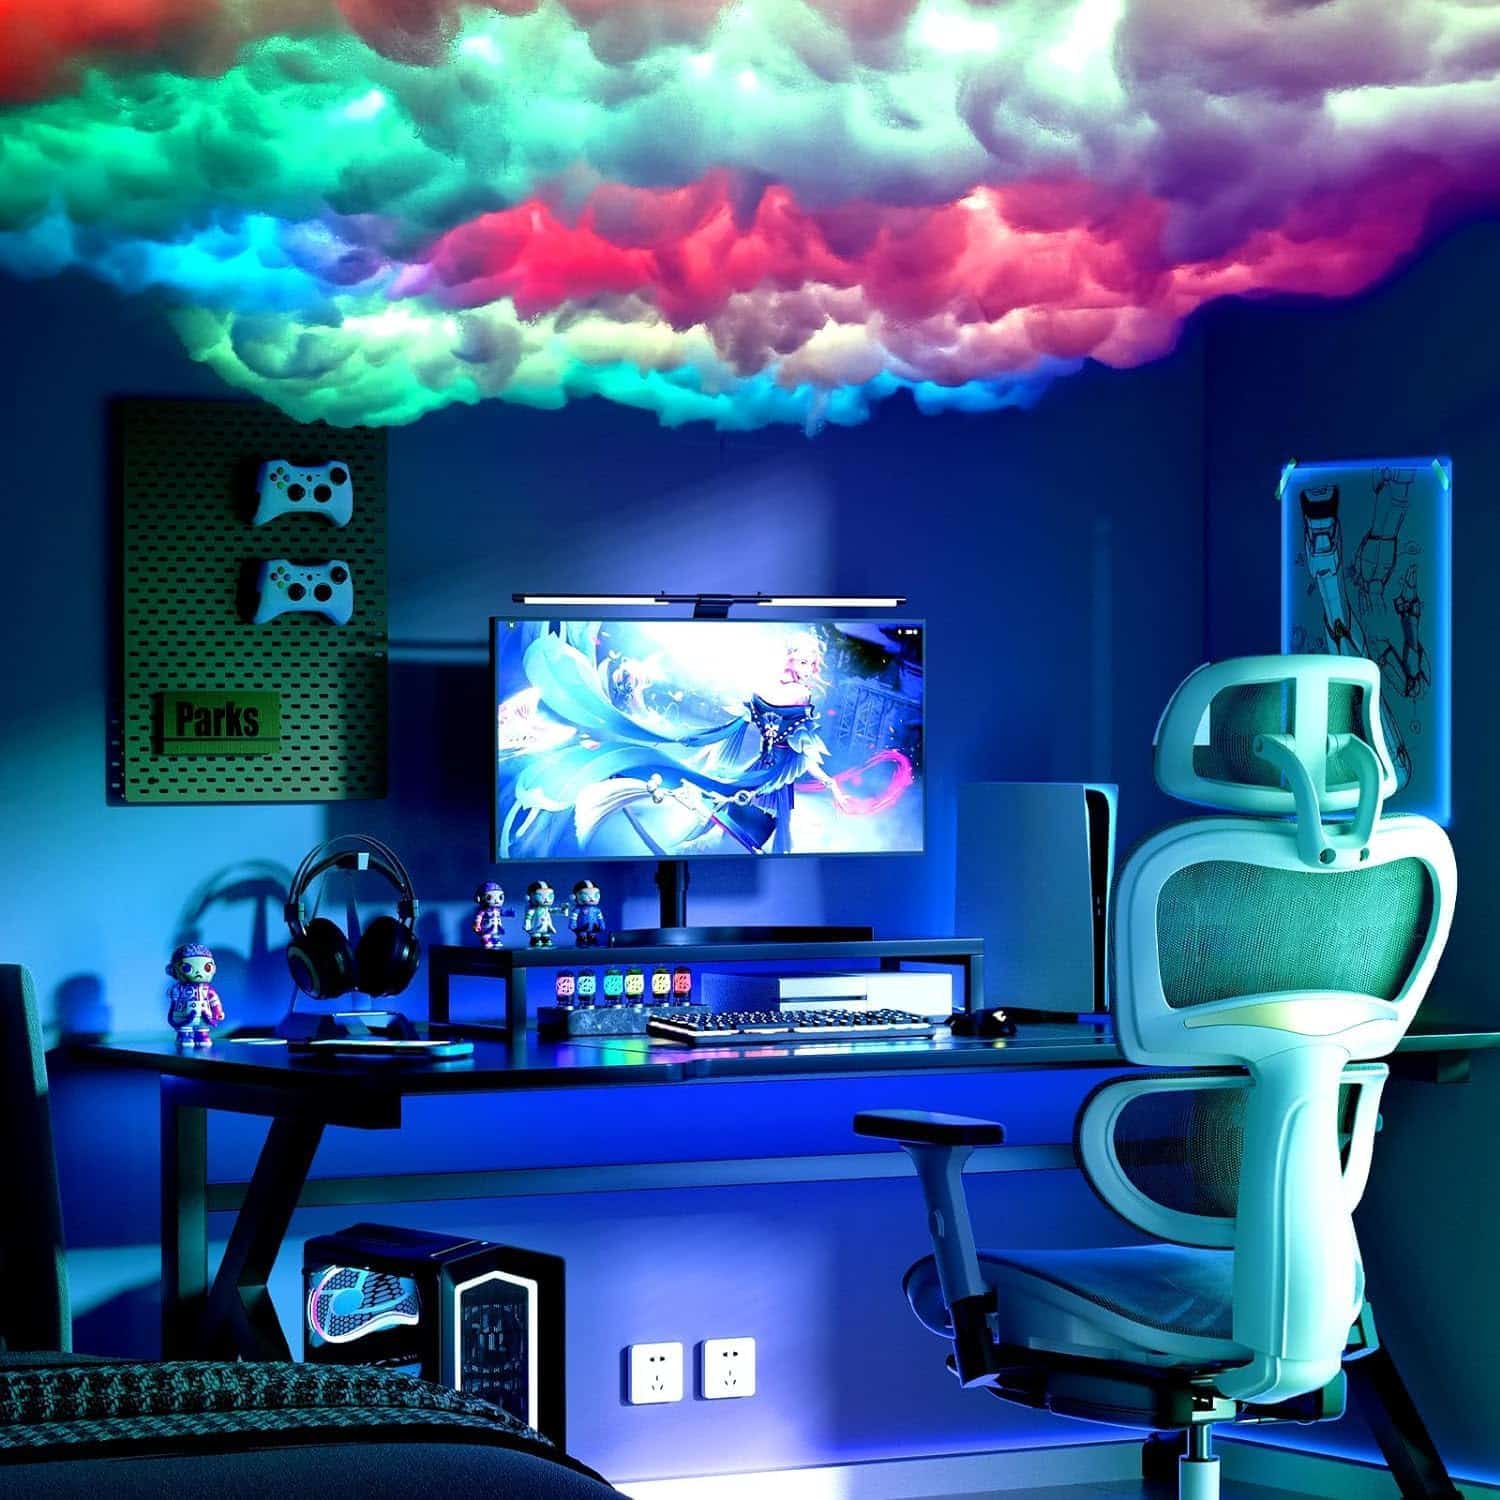 Upgraded 3D Thundercloud LED Light, Cloud Music Sync Multicolor Changing Strip Light, Atmosphere DIY Creative Thunder Cloud Lamp Wall Ceiling Light for Bedroom Gaming Room Party (1 Pcs, 19.75 Ft)